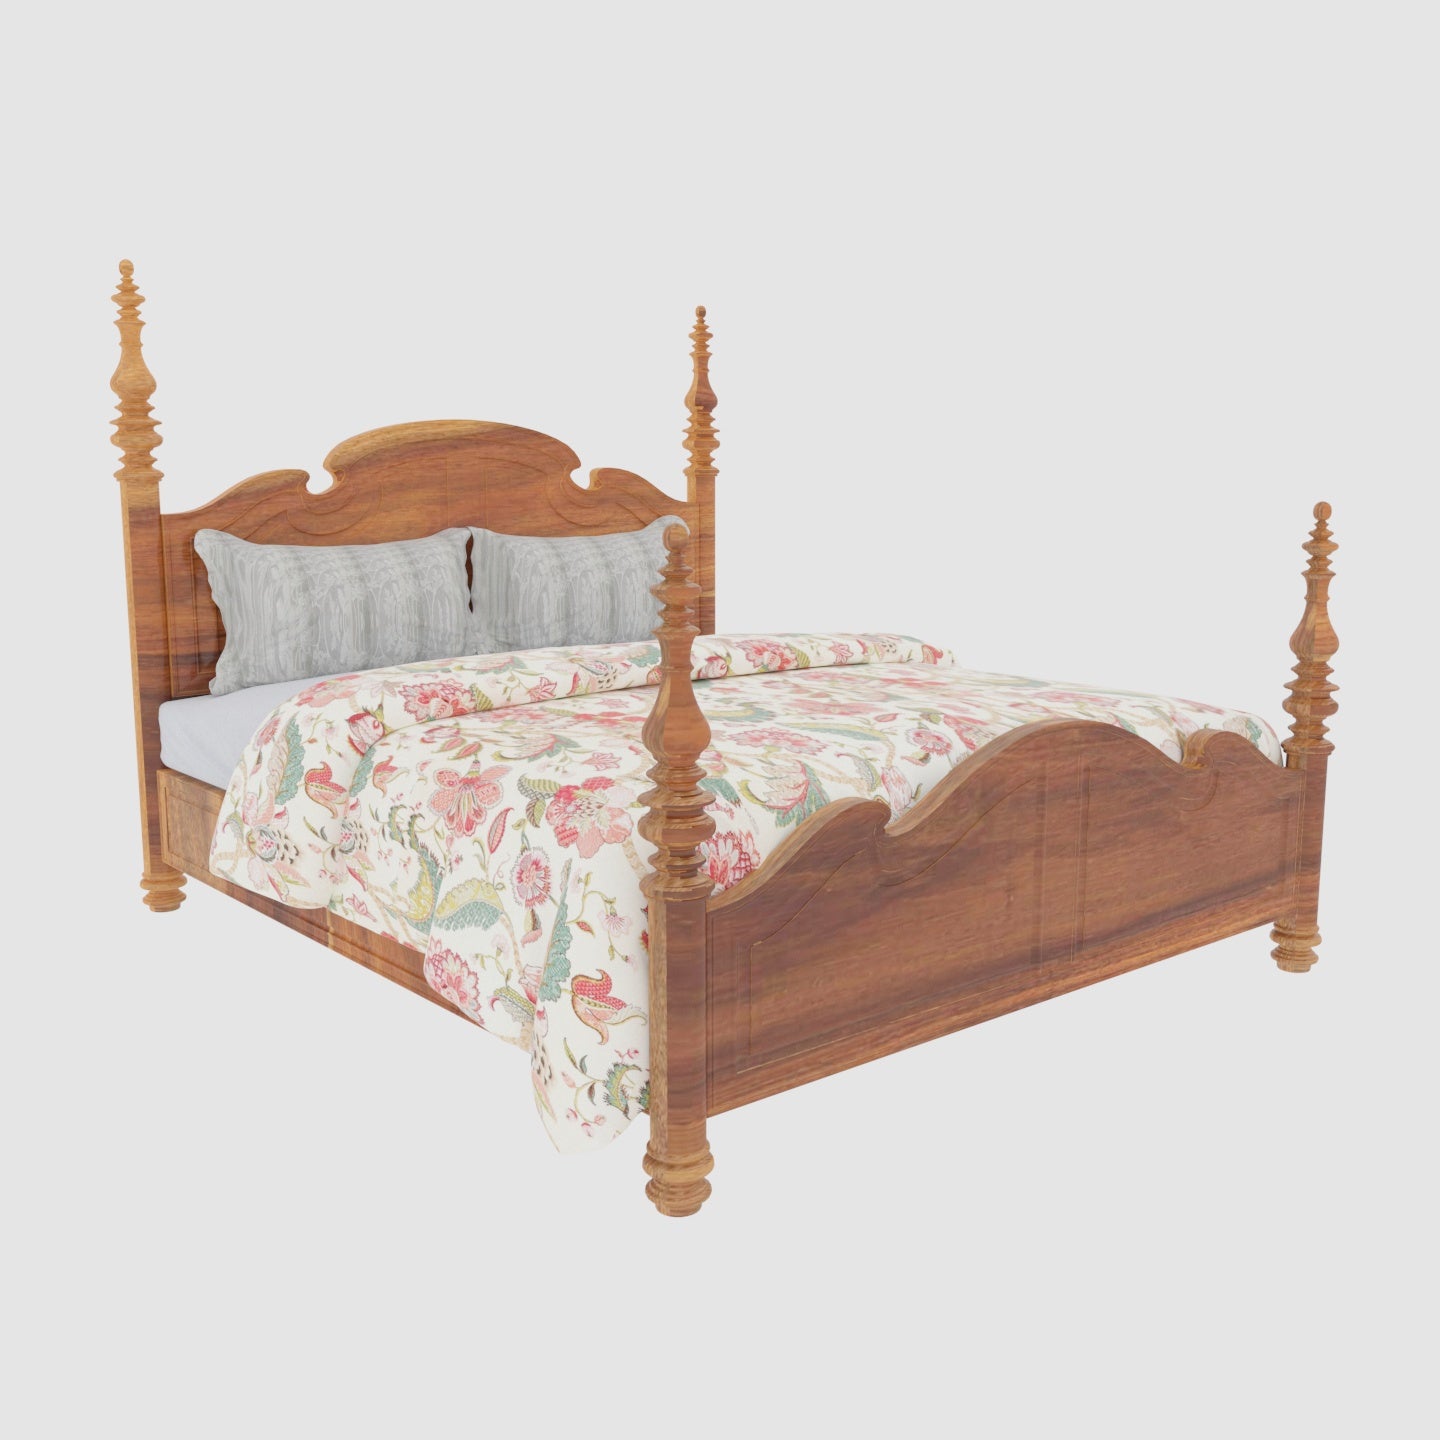 Traditional Handmade Wooden Premium Size Bed with Bedside Bedroom Furniture Sets